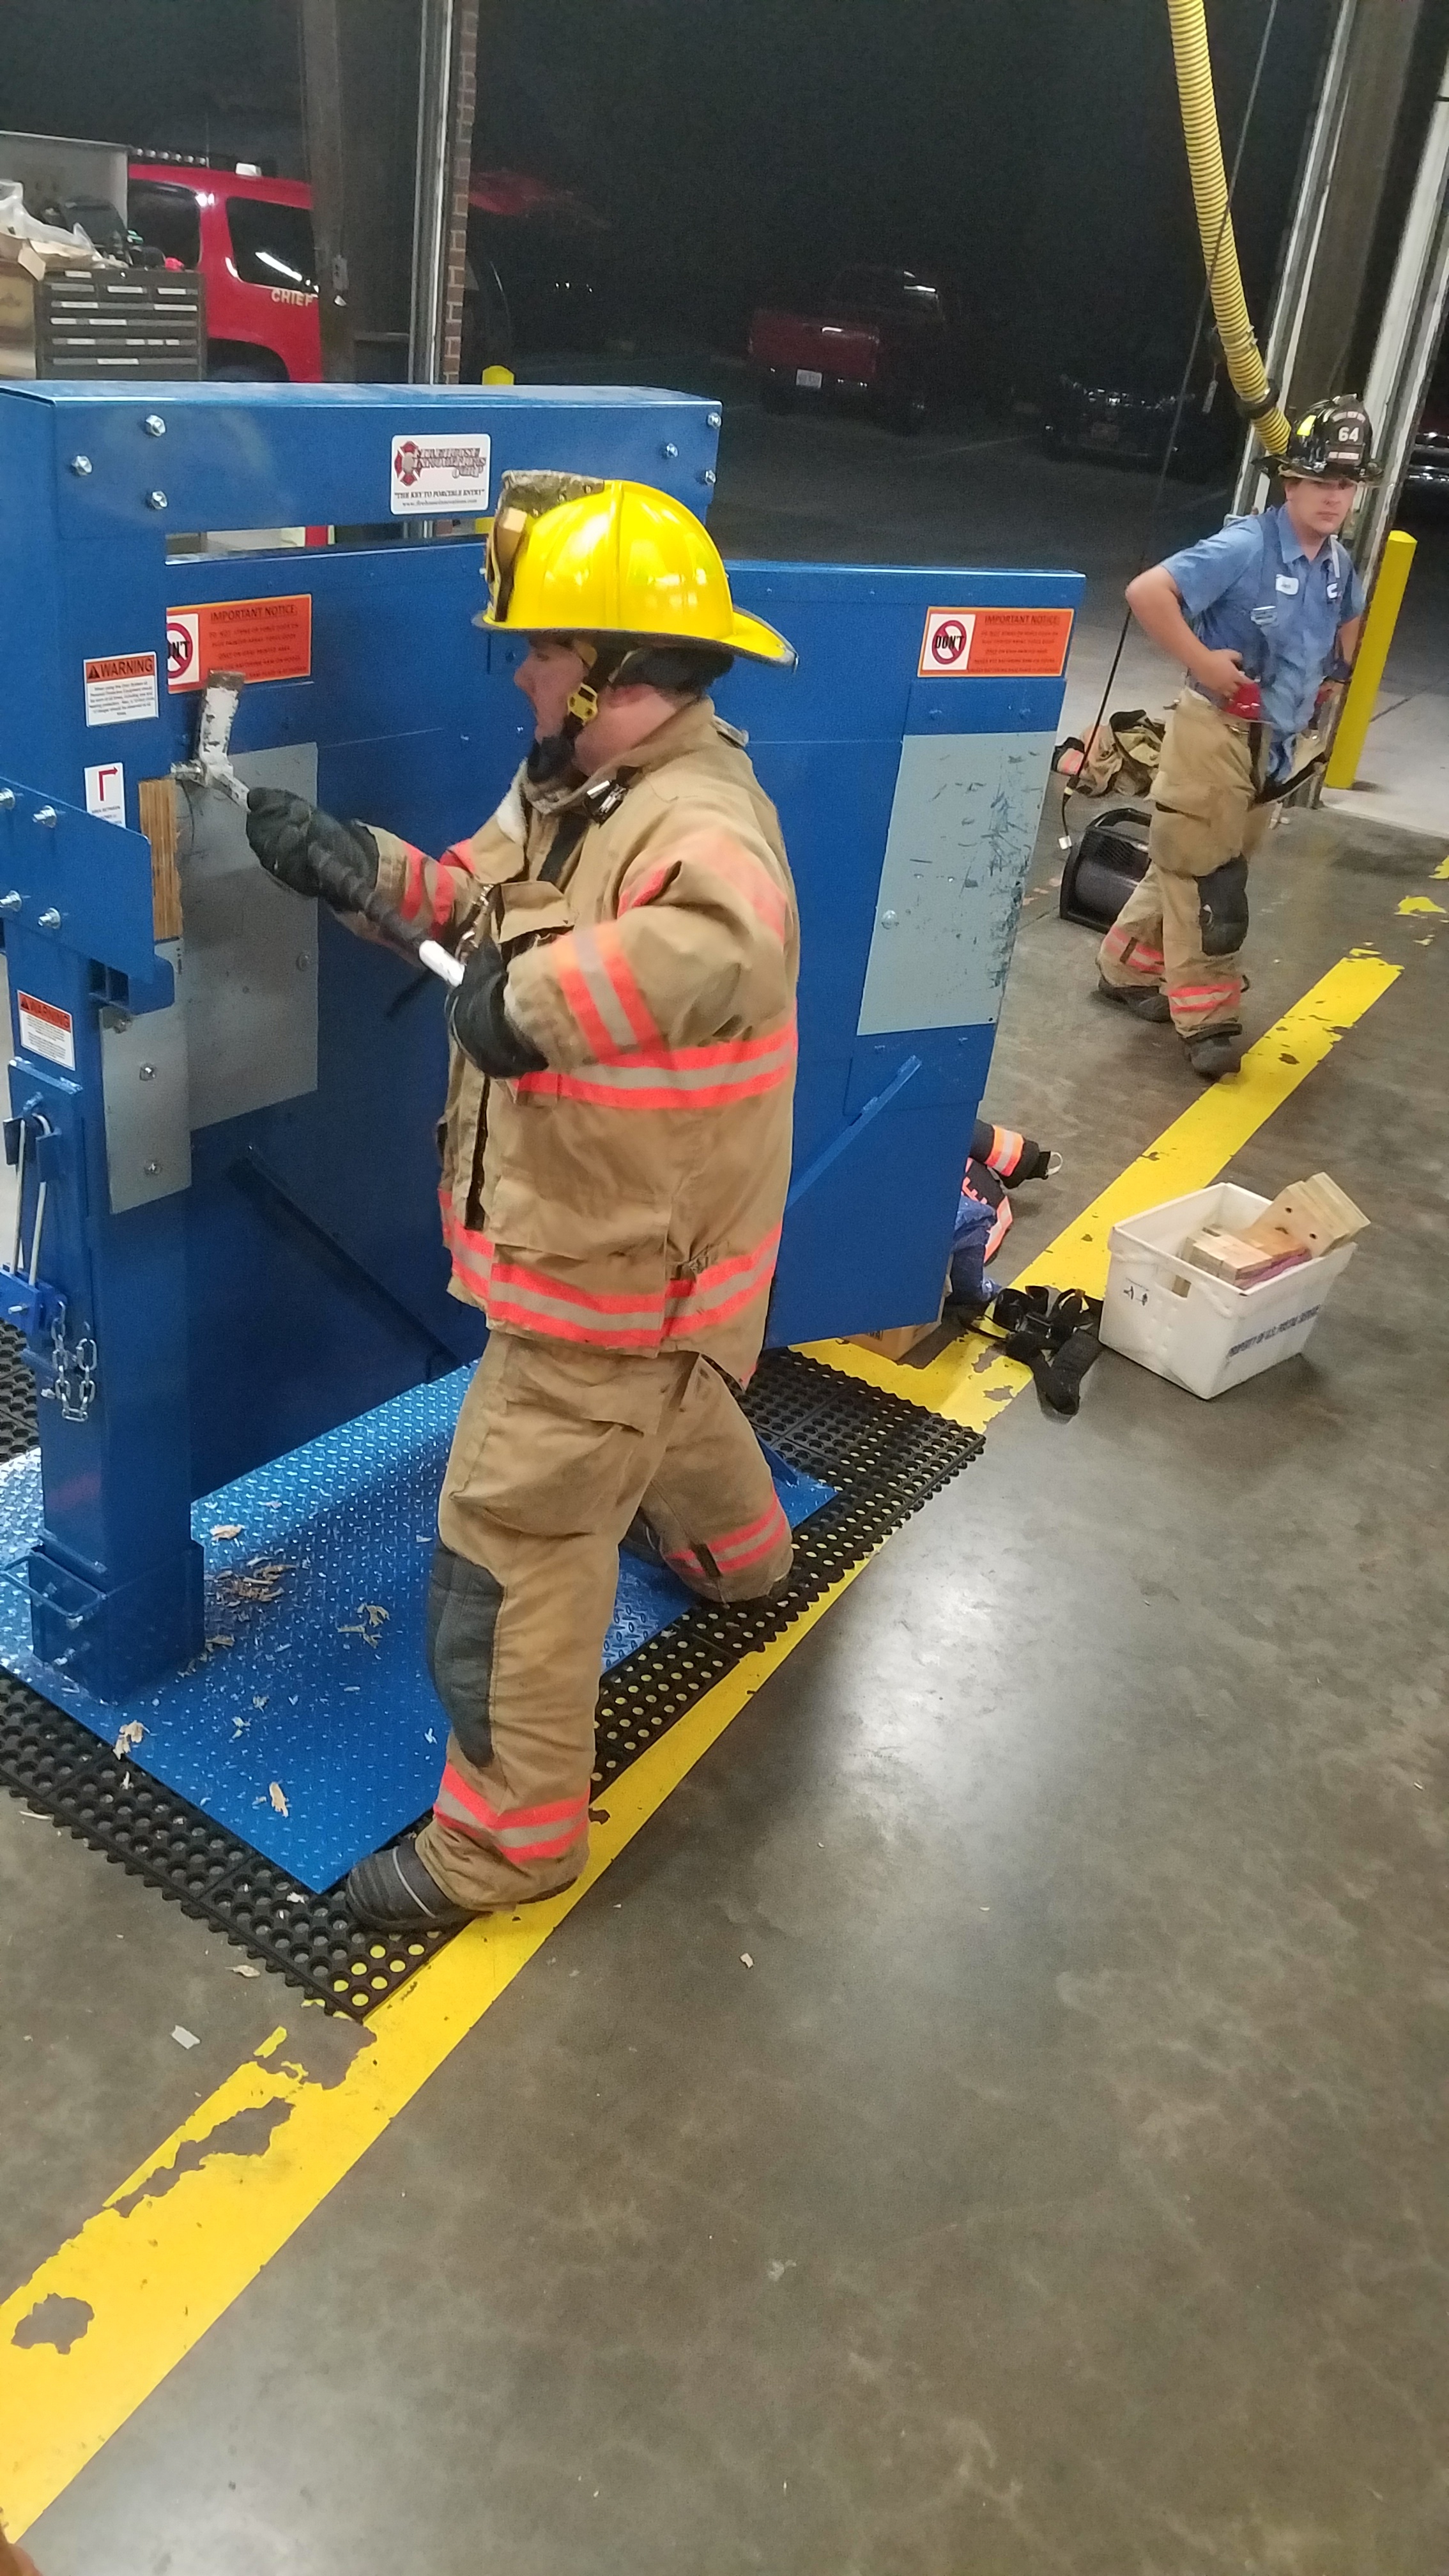 Sept 3, 2019 Forcible Entry Training with our new training prop